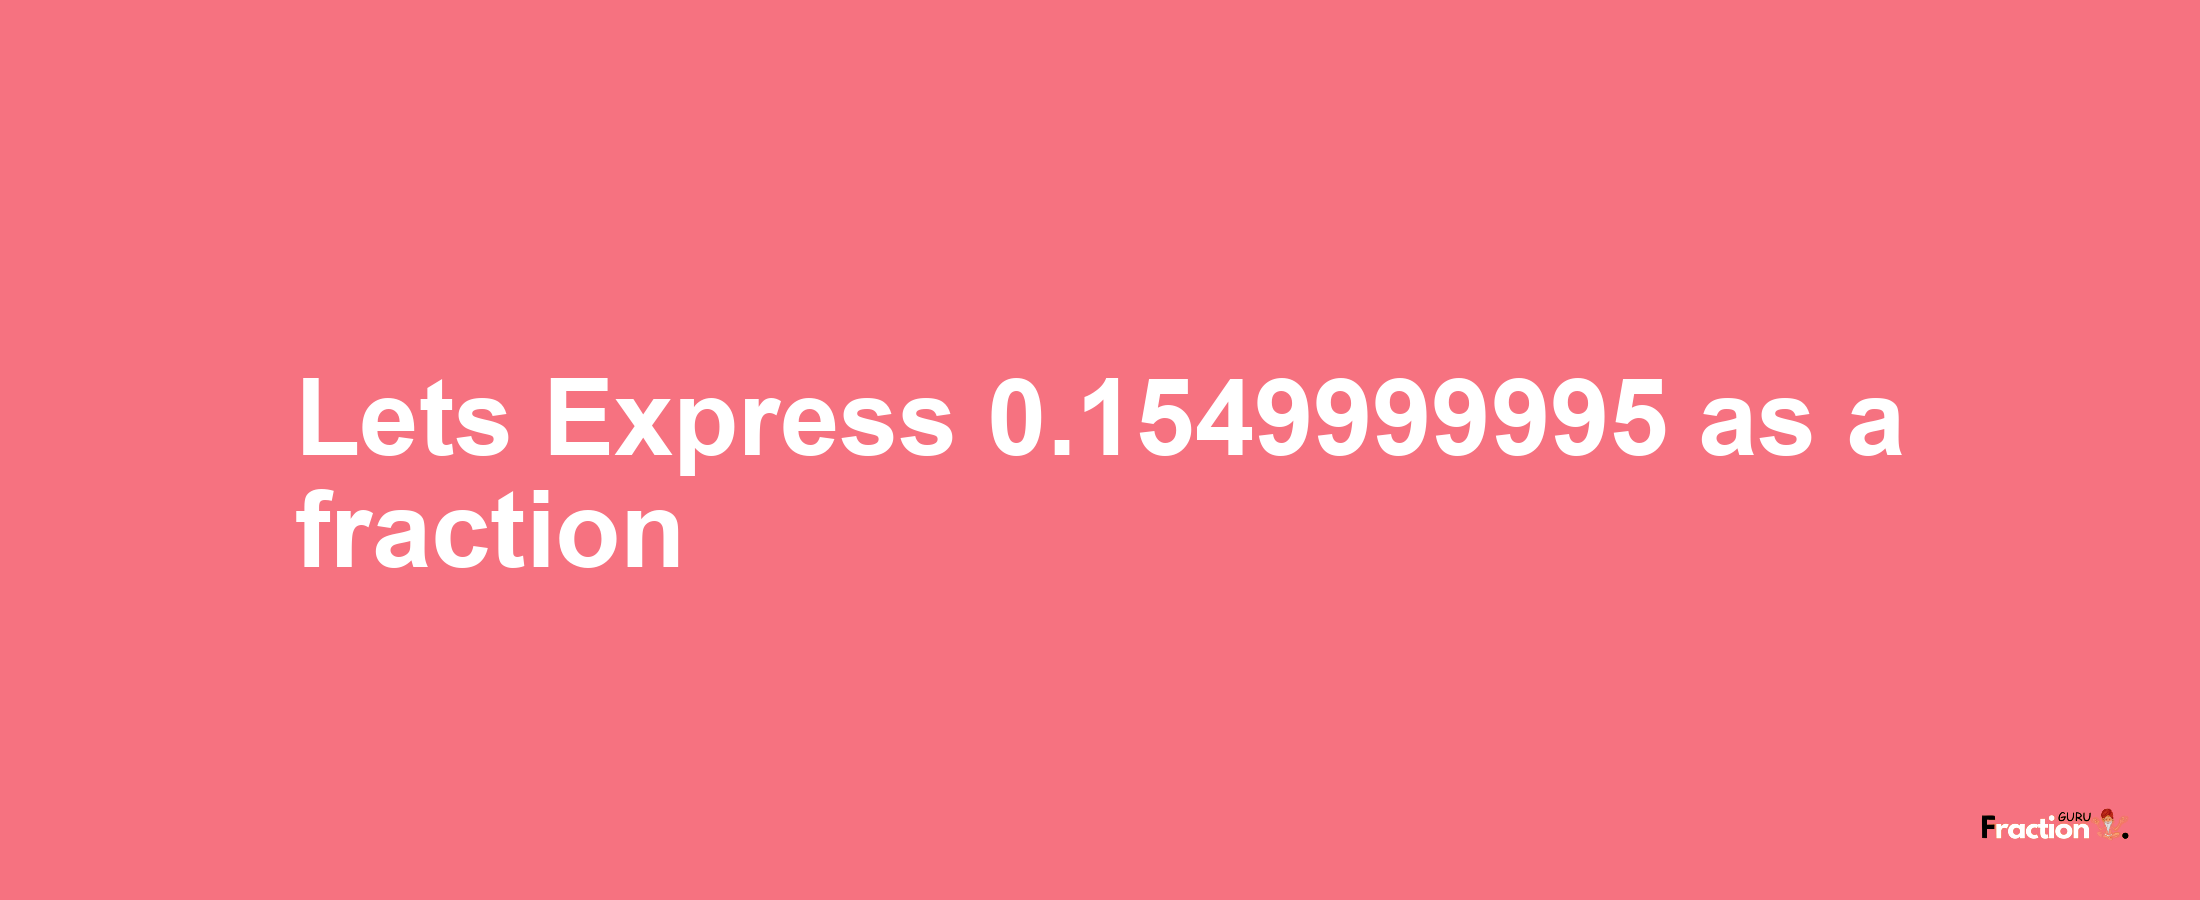 Lets Express 0.1549999995 as afraction